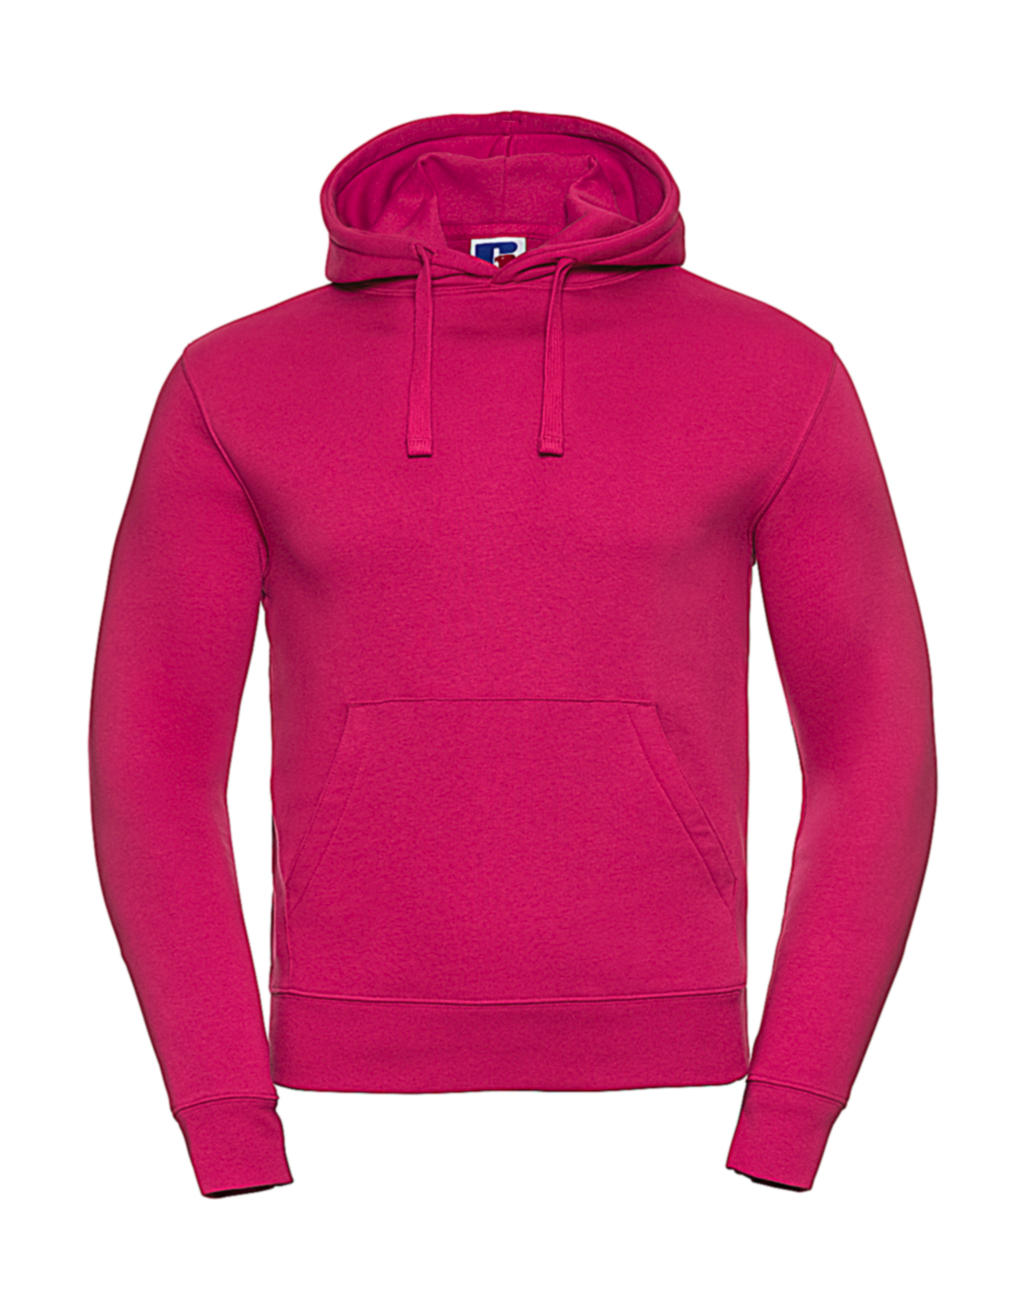  Mens Authentic Hooded Sweat in Farbe Fuchsia